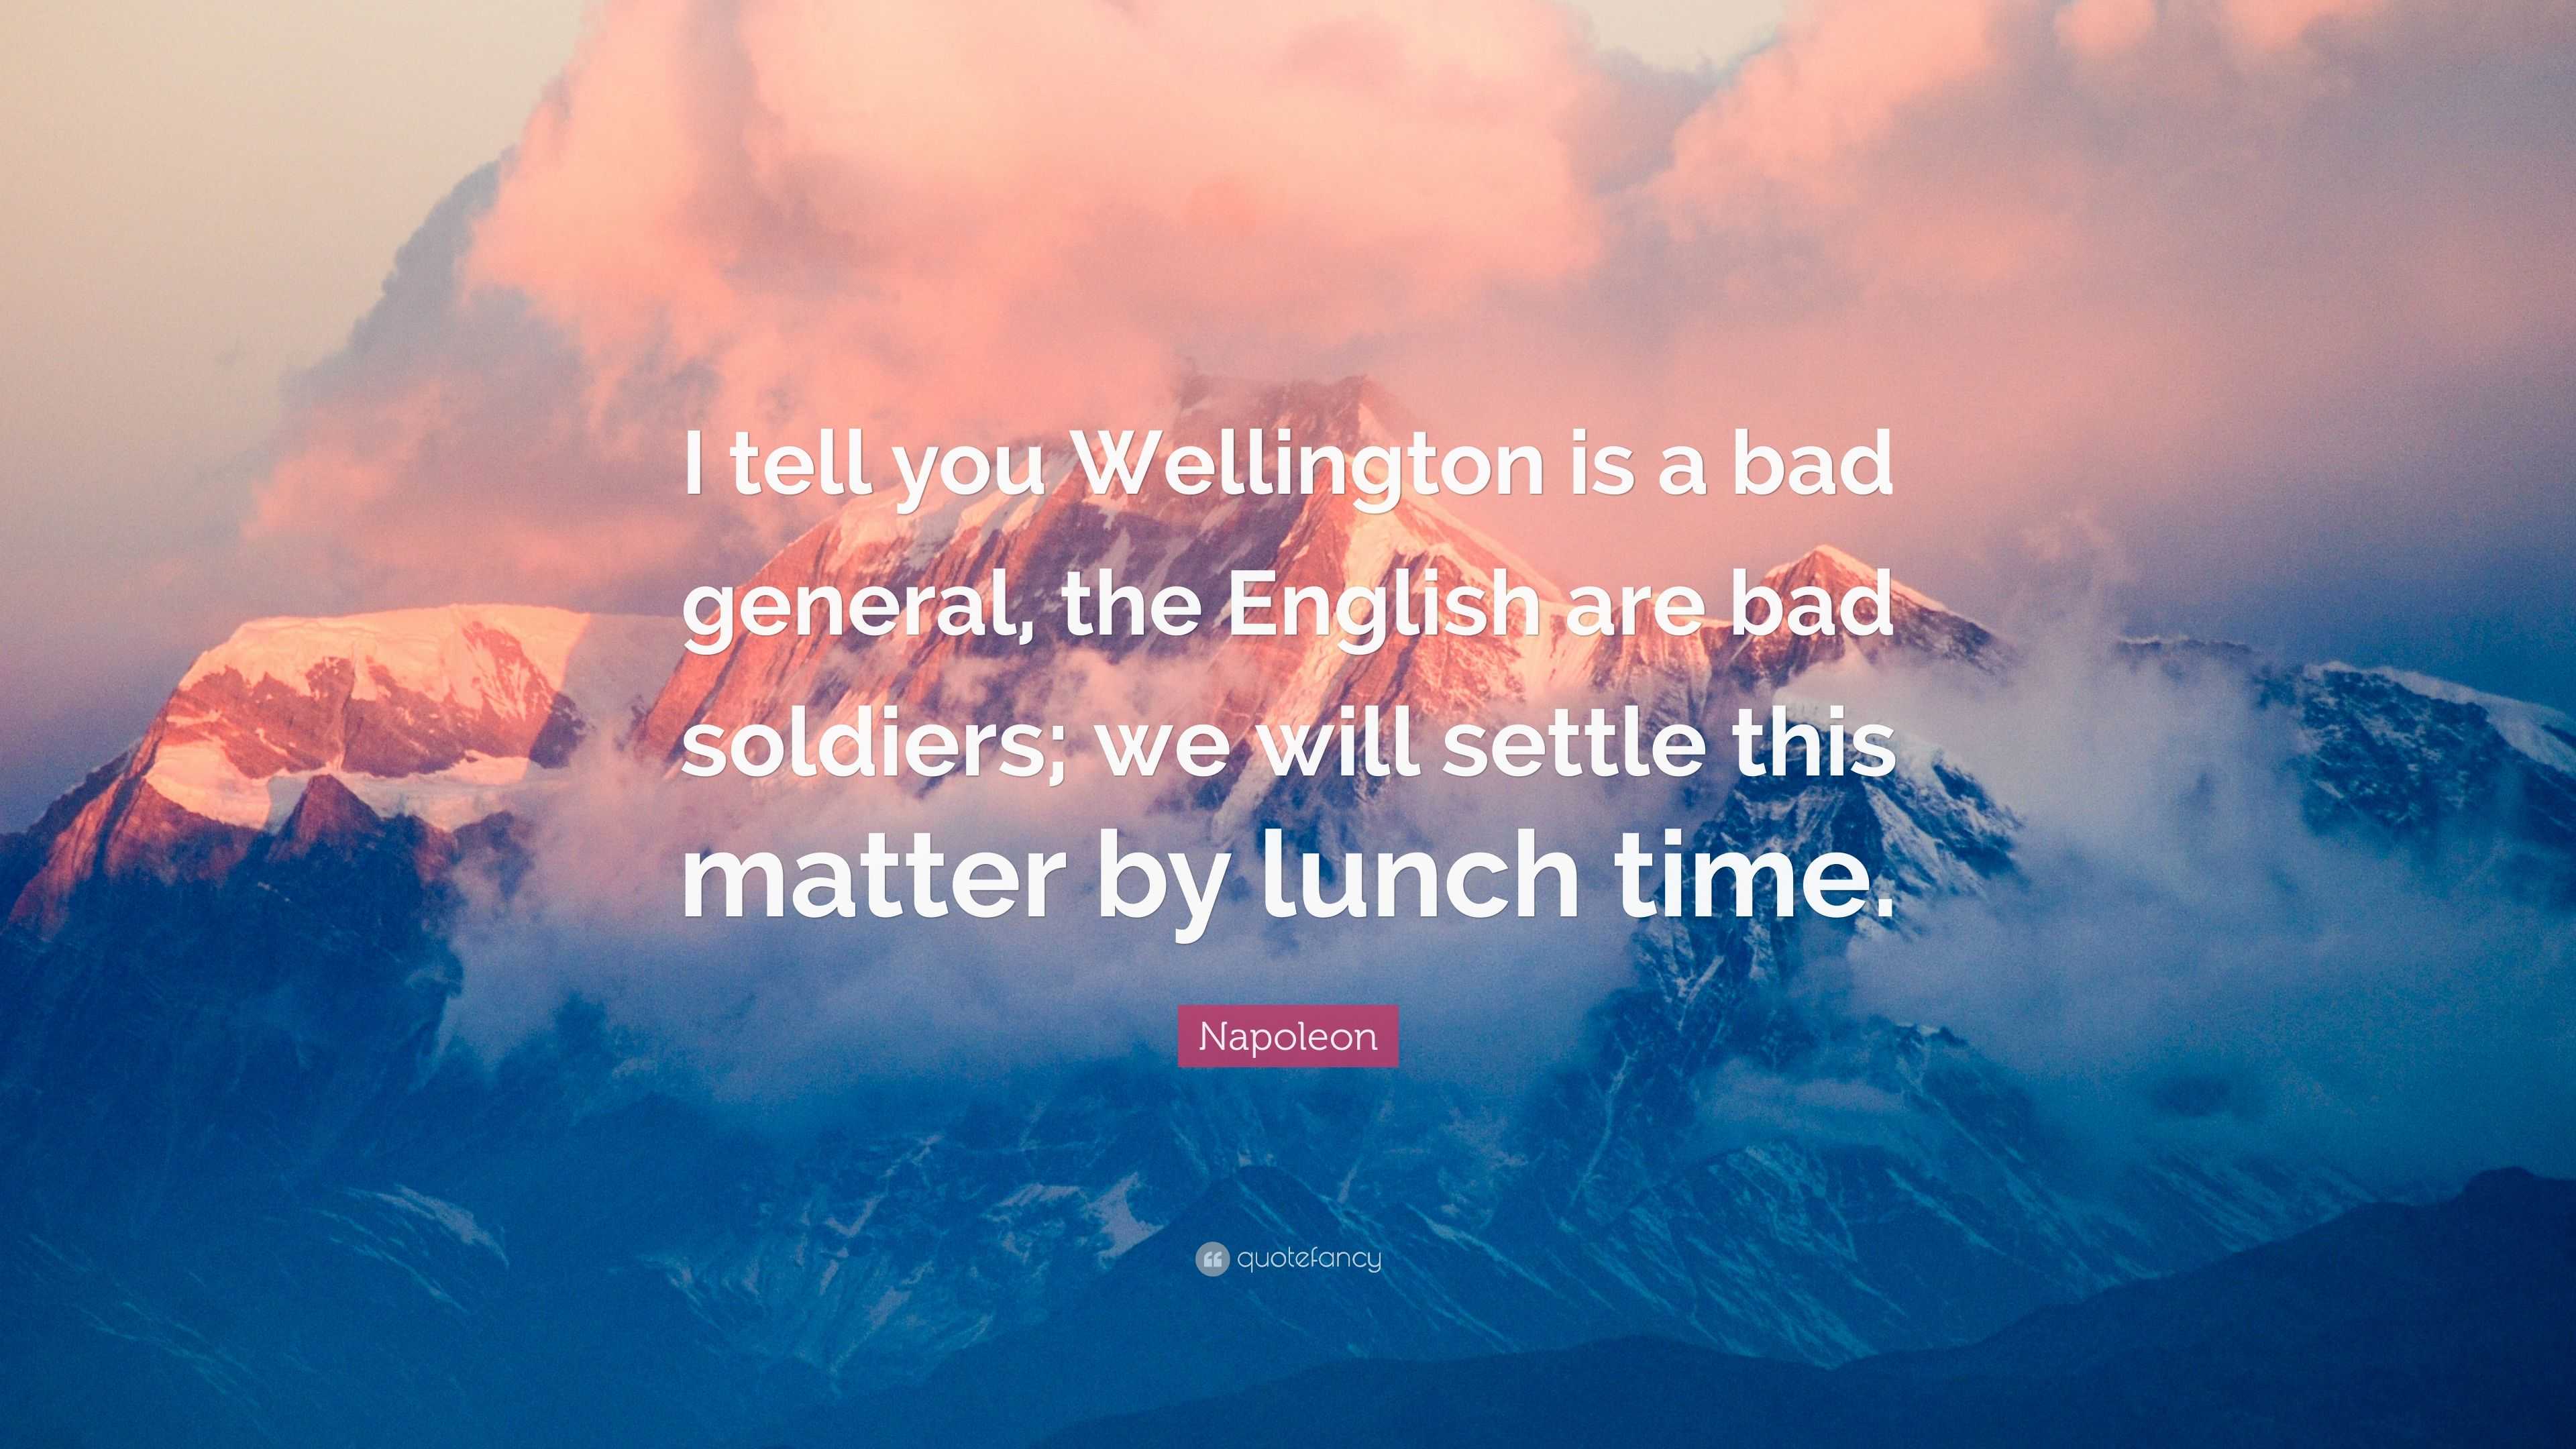 Napoleon Quote: “I tell you Wellington is a bad general, the English ...